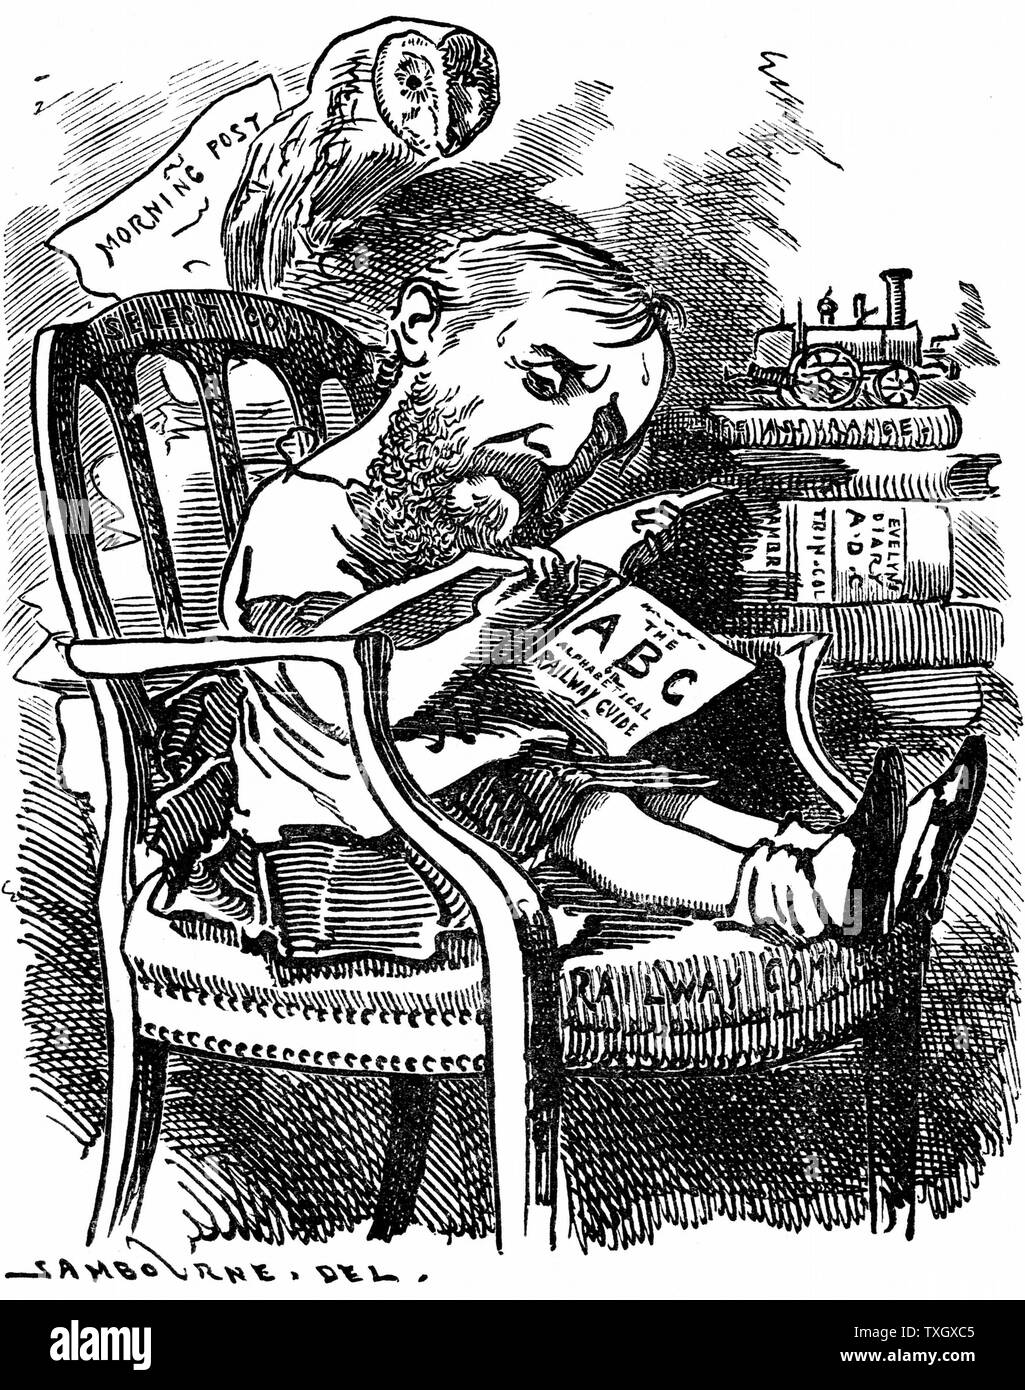 Evelyn Ashley (1836-1907) English author and Liberal politician; son of 7th Earl of Shaftesbury. Cartoon by Edward Linley Sambourne  in the Fancy Portraits series from 'Punch' when Ashley was under-secretary at the Board of Trade April 1881 London Stock Photo